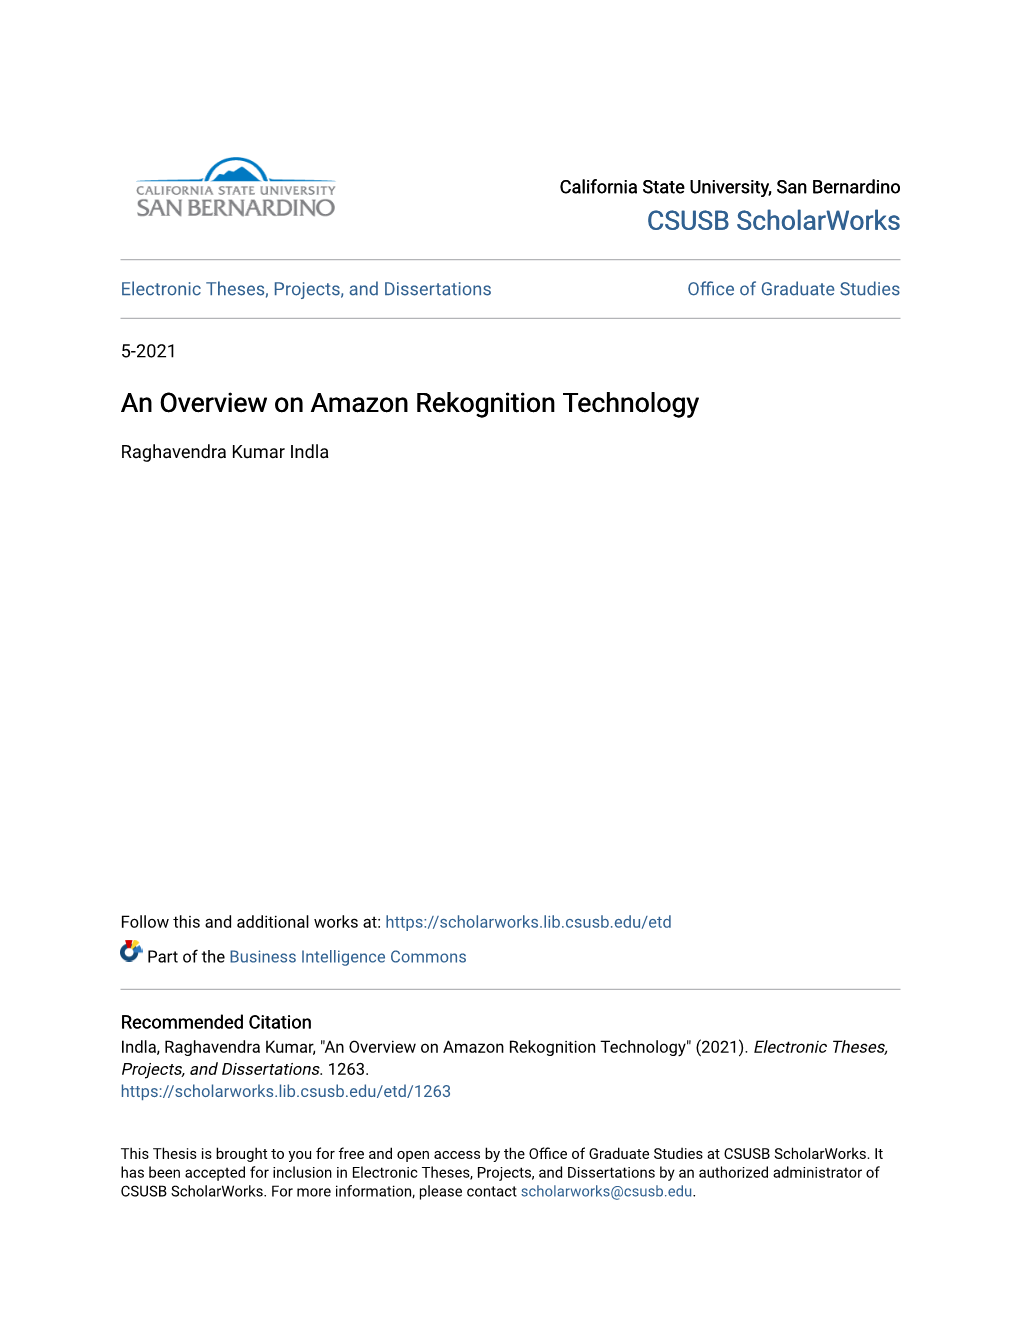 An Overview on Amazon Rekognition Technology